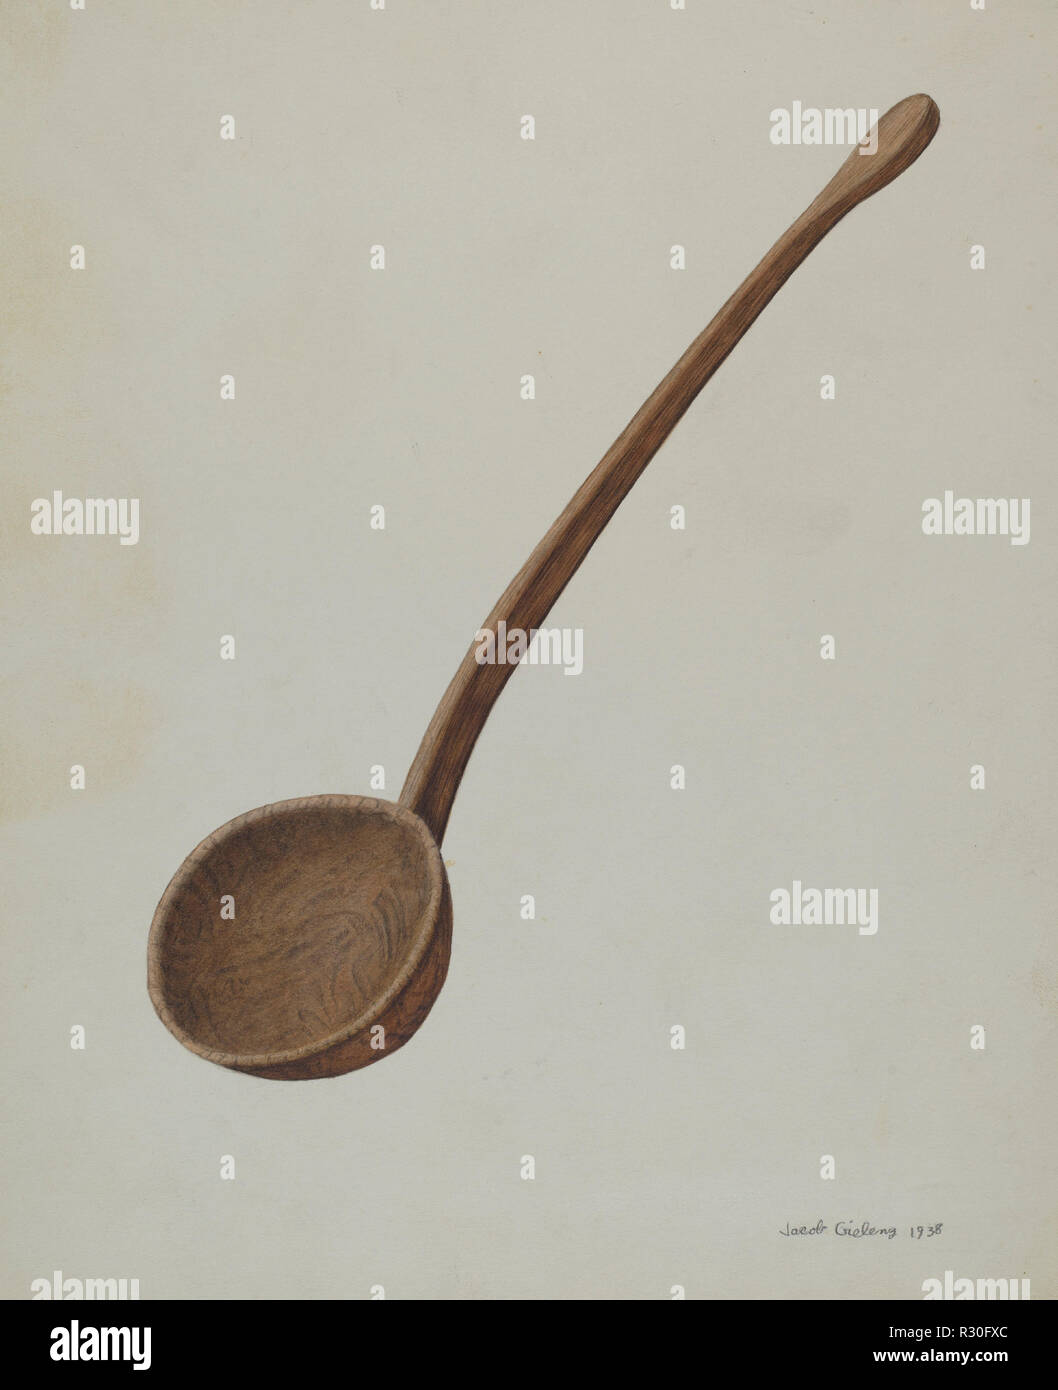 Wooden Dipper. Dated: 1938. Dimensions: overall: 28 x 22.9 cm (11 x 9 in.). Medium: watercolor and graphite on paperboard. Museum: National Gallery of Art, Washington DC. Author: Jacob Gielens. Stock Photo